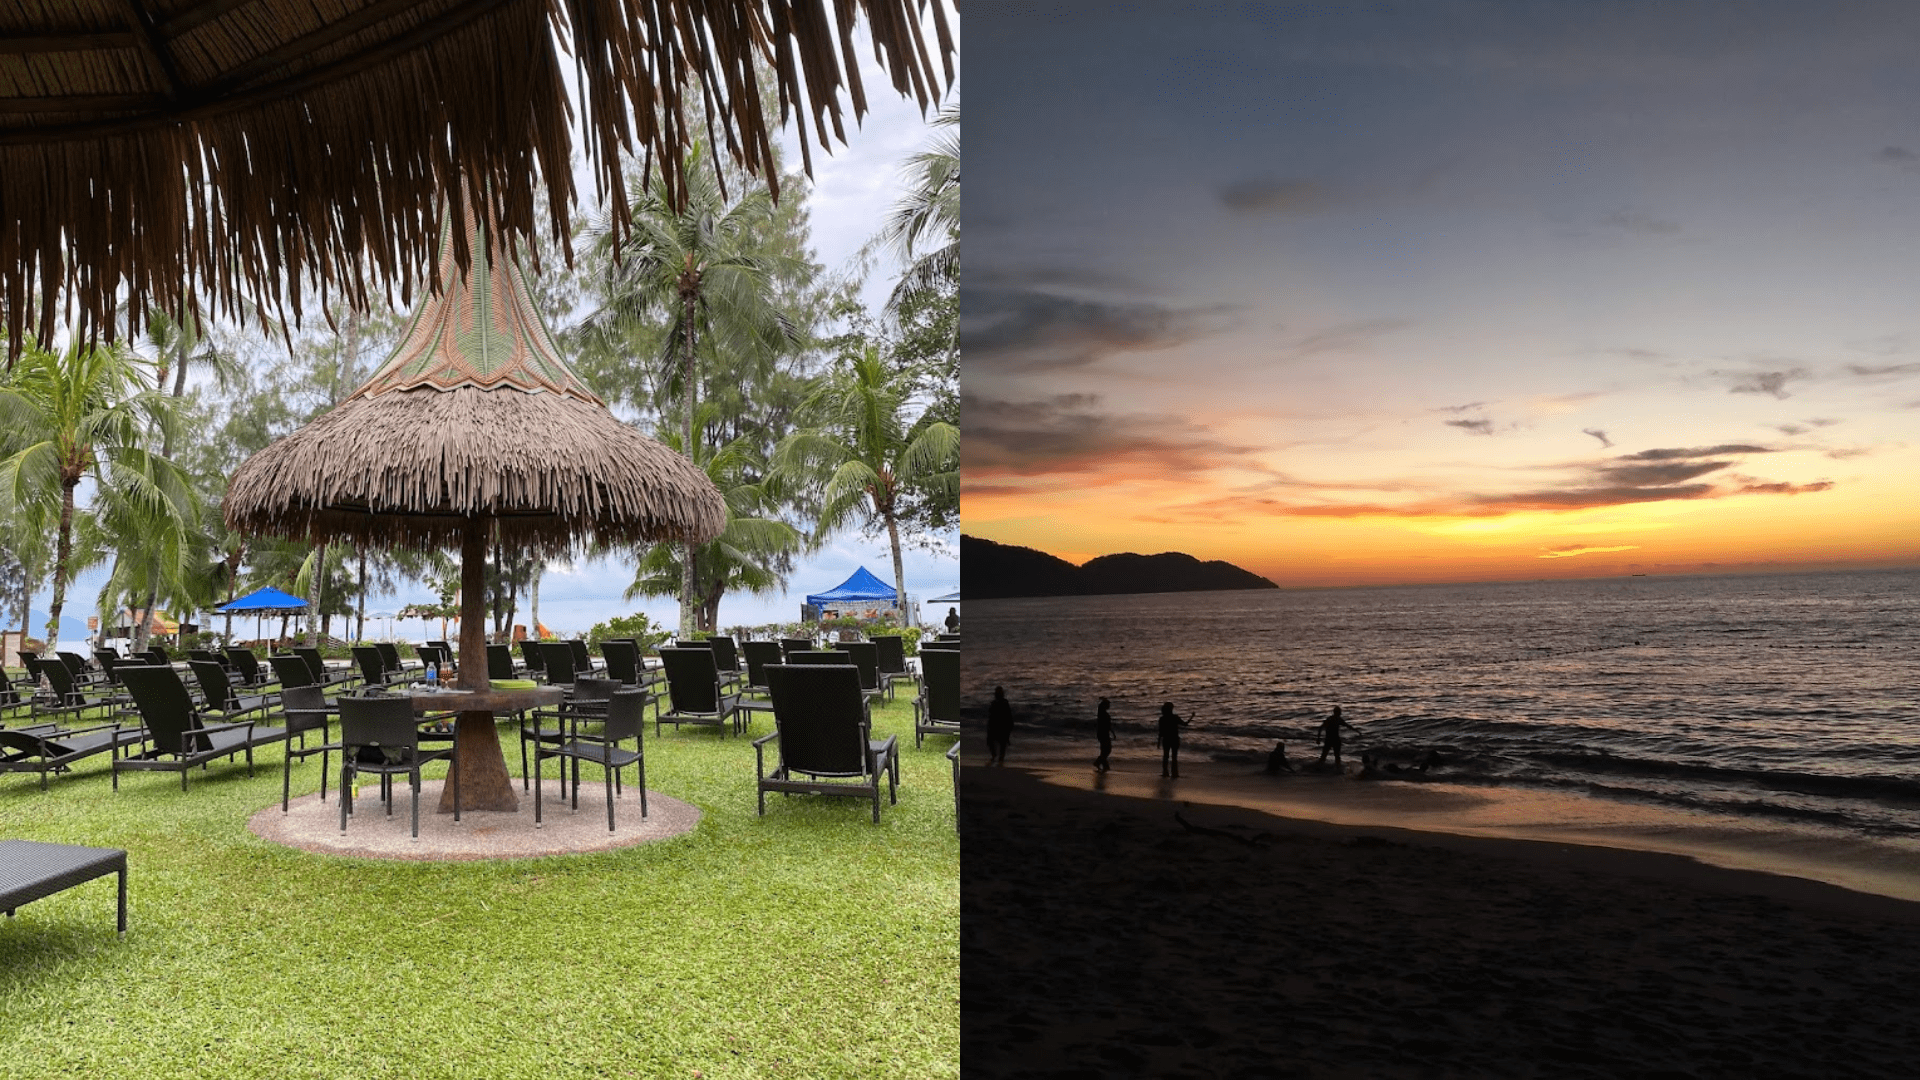 Best Beach Bar in Penang - Sigi's Bar and Grill on the Beach